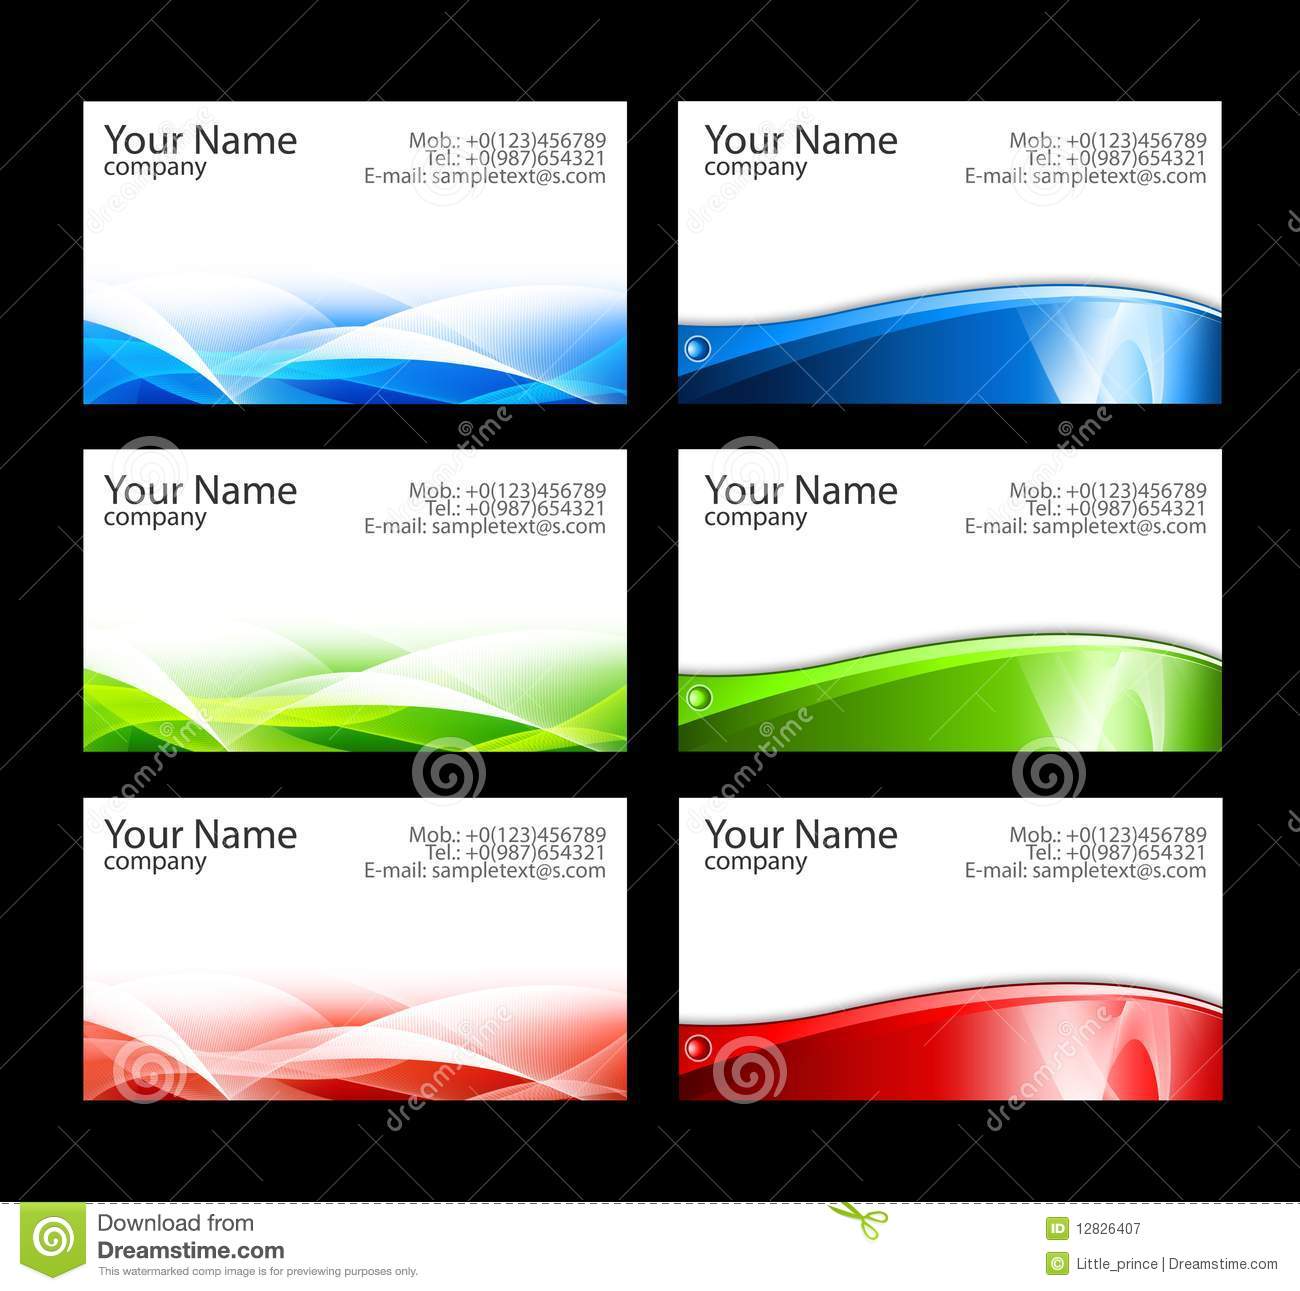 24 Business Card Templates Images - Free Business Card Template Within Business Card Template Word 2010